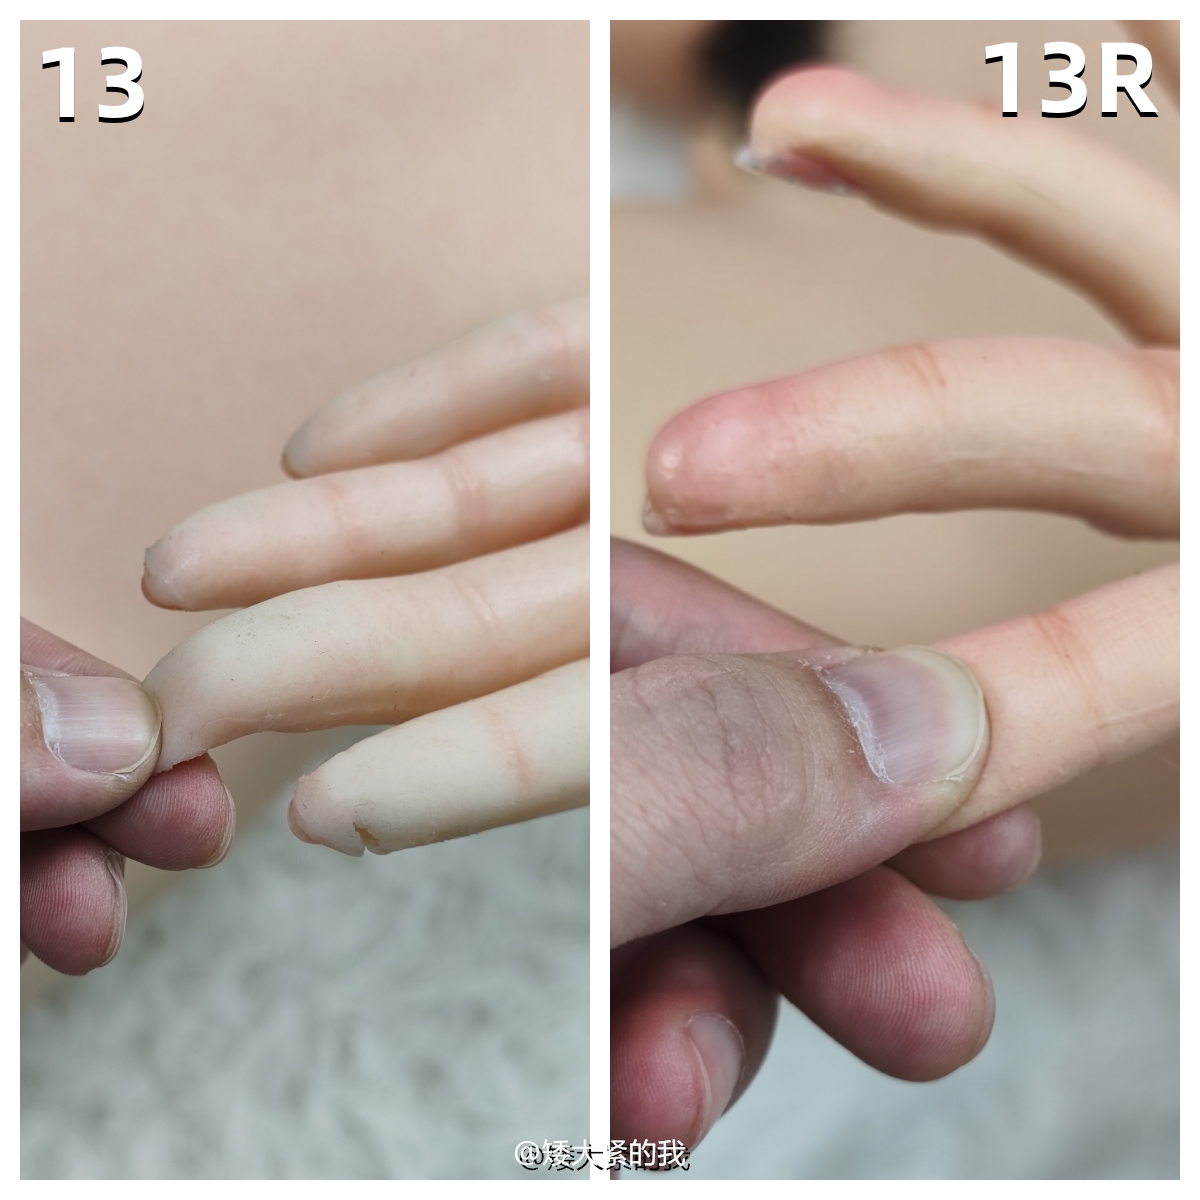 Gynoid Doll RZR|Realistic Silicone Sex Doll|Doll's Hands|Finger|Soft Finger|13R|Lori|Lisa|